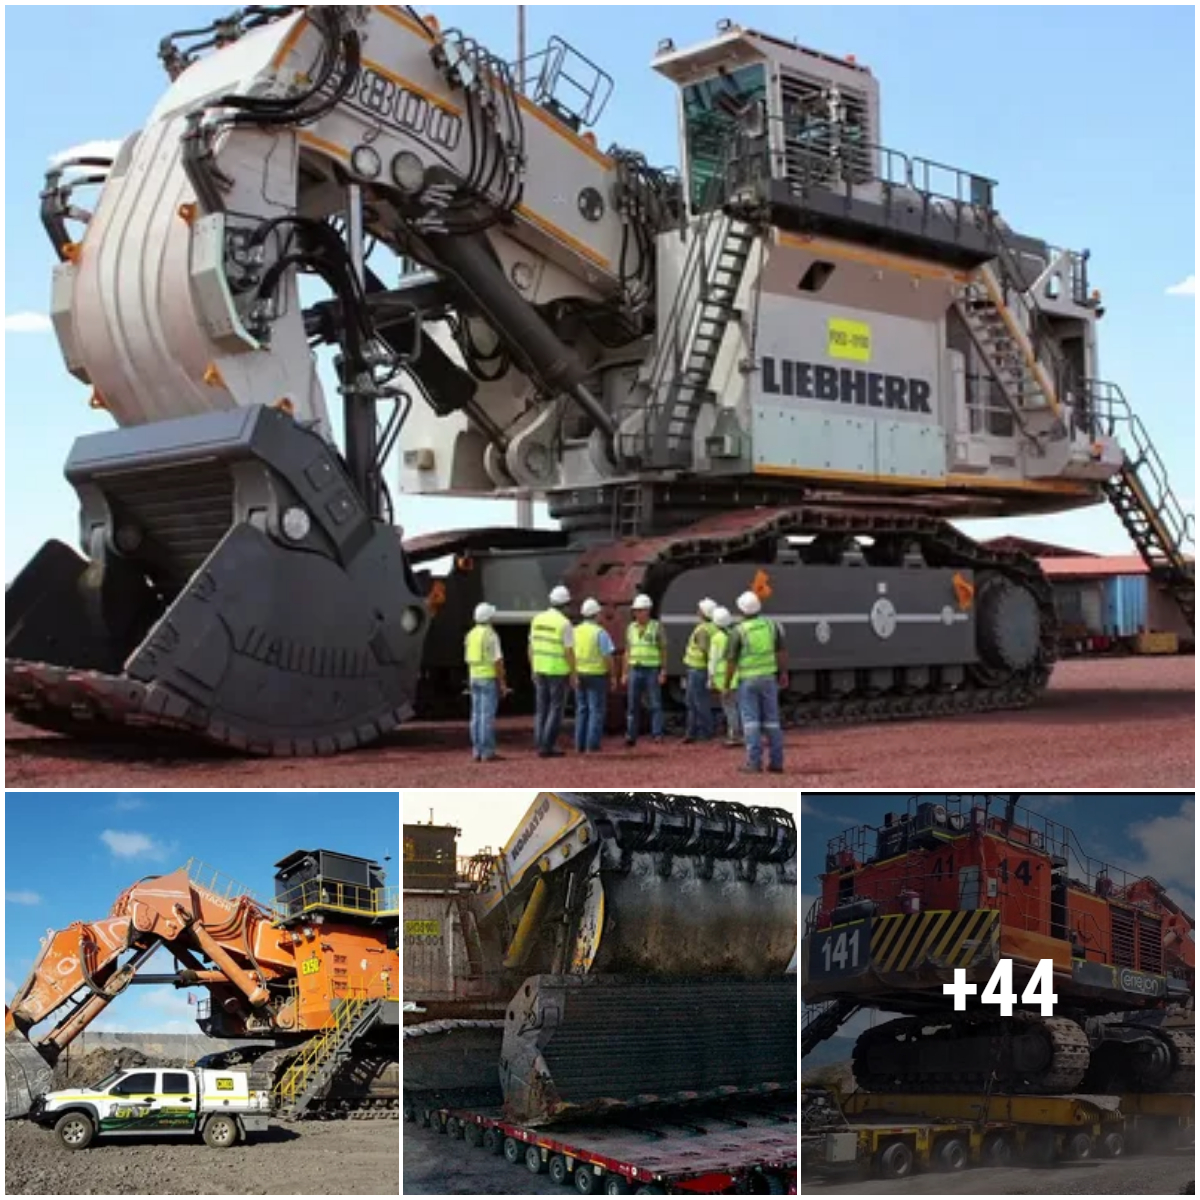 The world’s largest excavator is being transported – an extremely difficult task